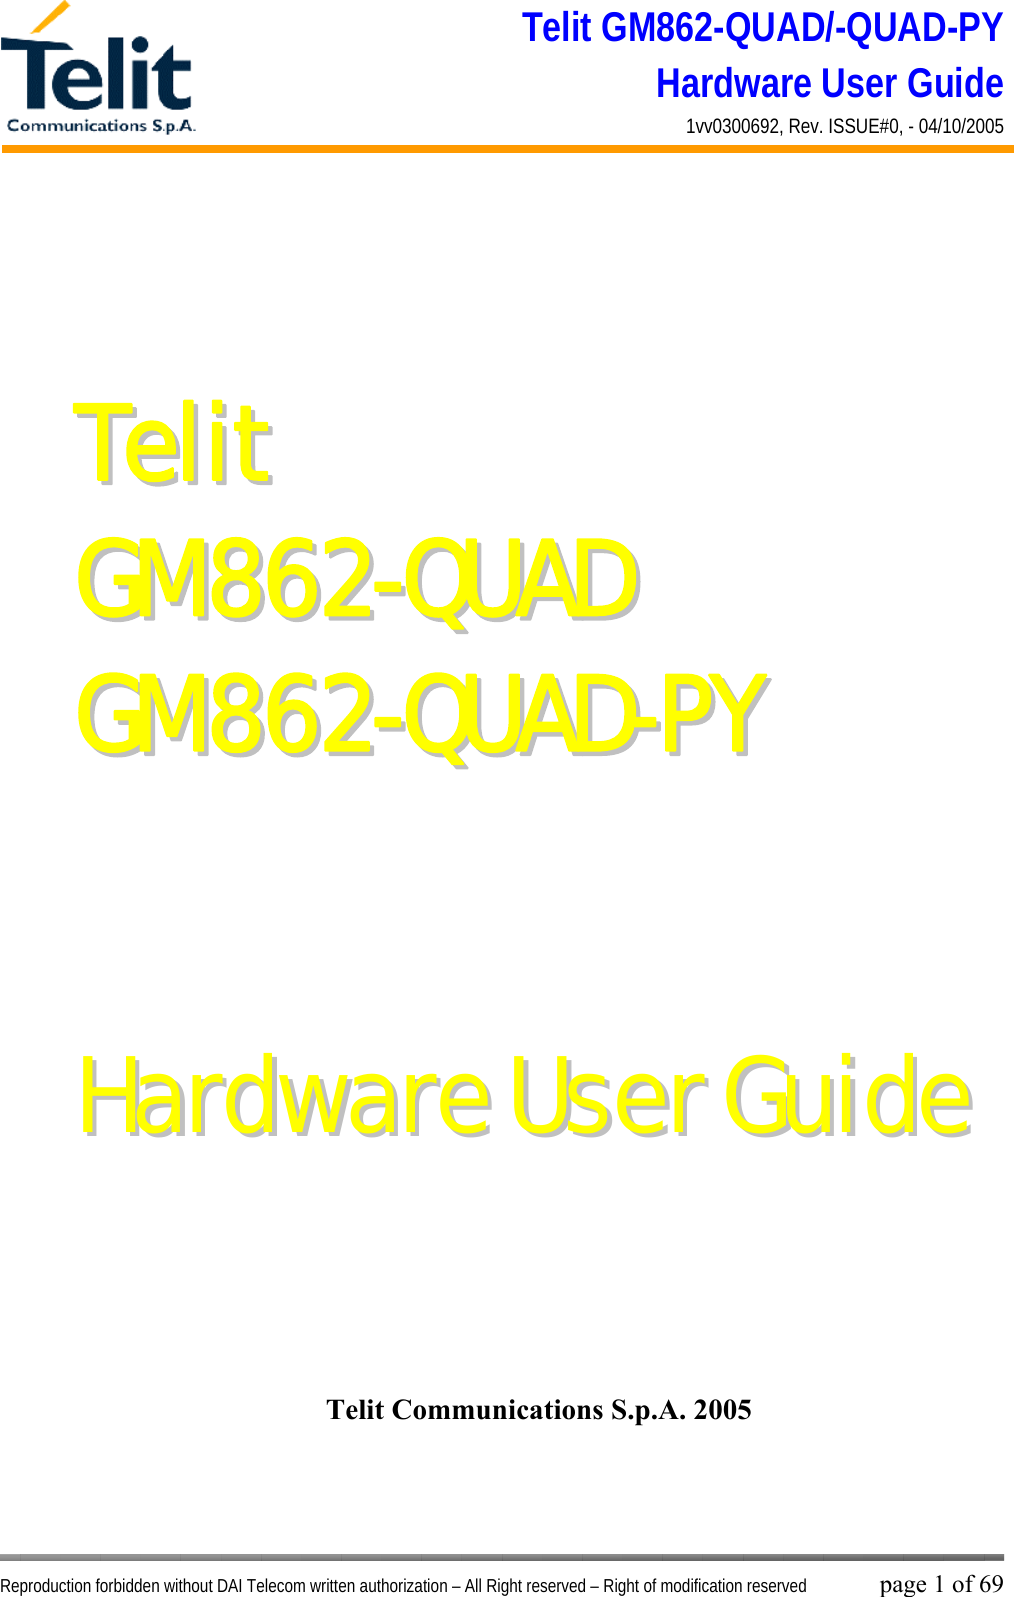 Telit GM862-QUAD/-QUAD-PY Hardware User Guide 1vv0300692, Rev. ISSUE#0, - 04/10/2005   Reproduction forbidden without DAI Telecom written authorization – All Right reserved – Right of modification reserved page 1 of 69 TTeelliitt  GGMM886622--QQUUAADD  GGMM886622--QQUUAADD--PPYY       HHaarrddwwaarree  UUsseerr  GGuuiiddee Telit Communications S.p.A. 2005  